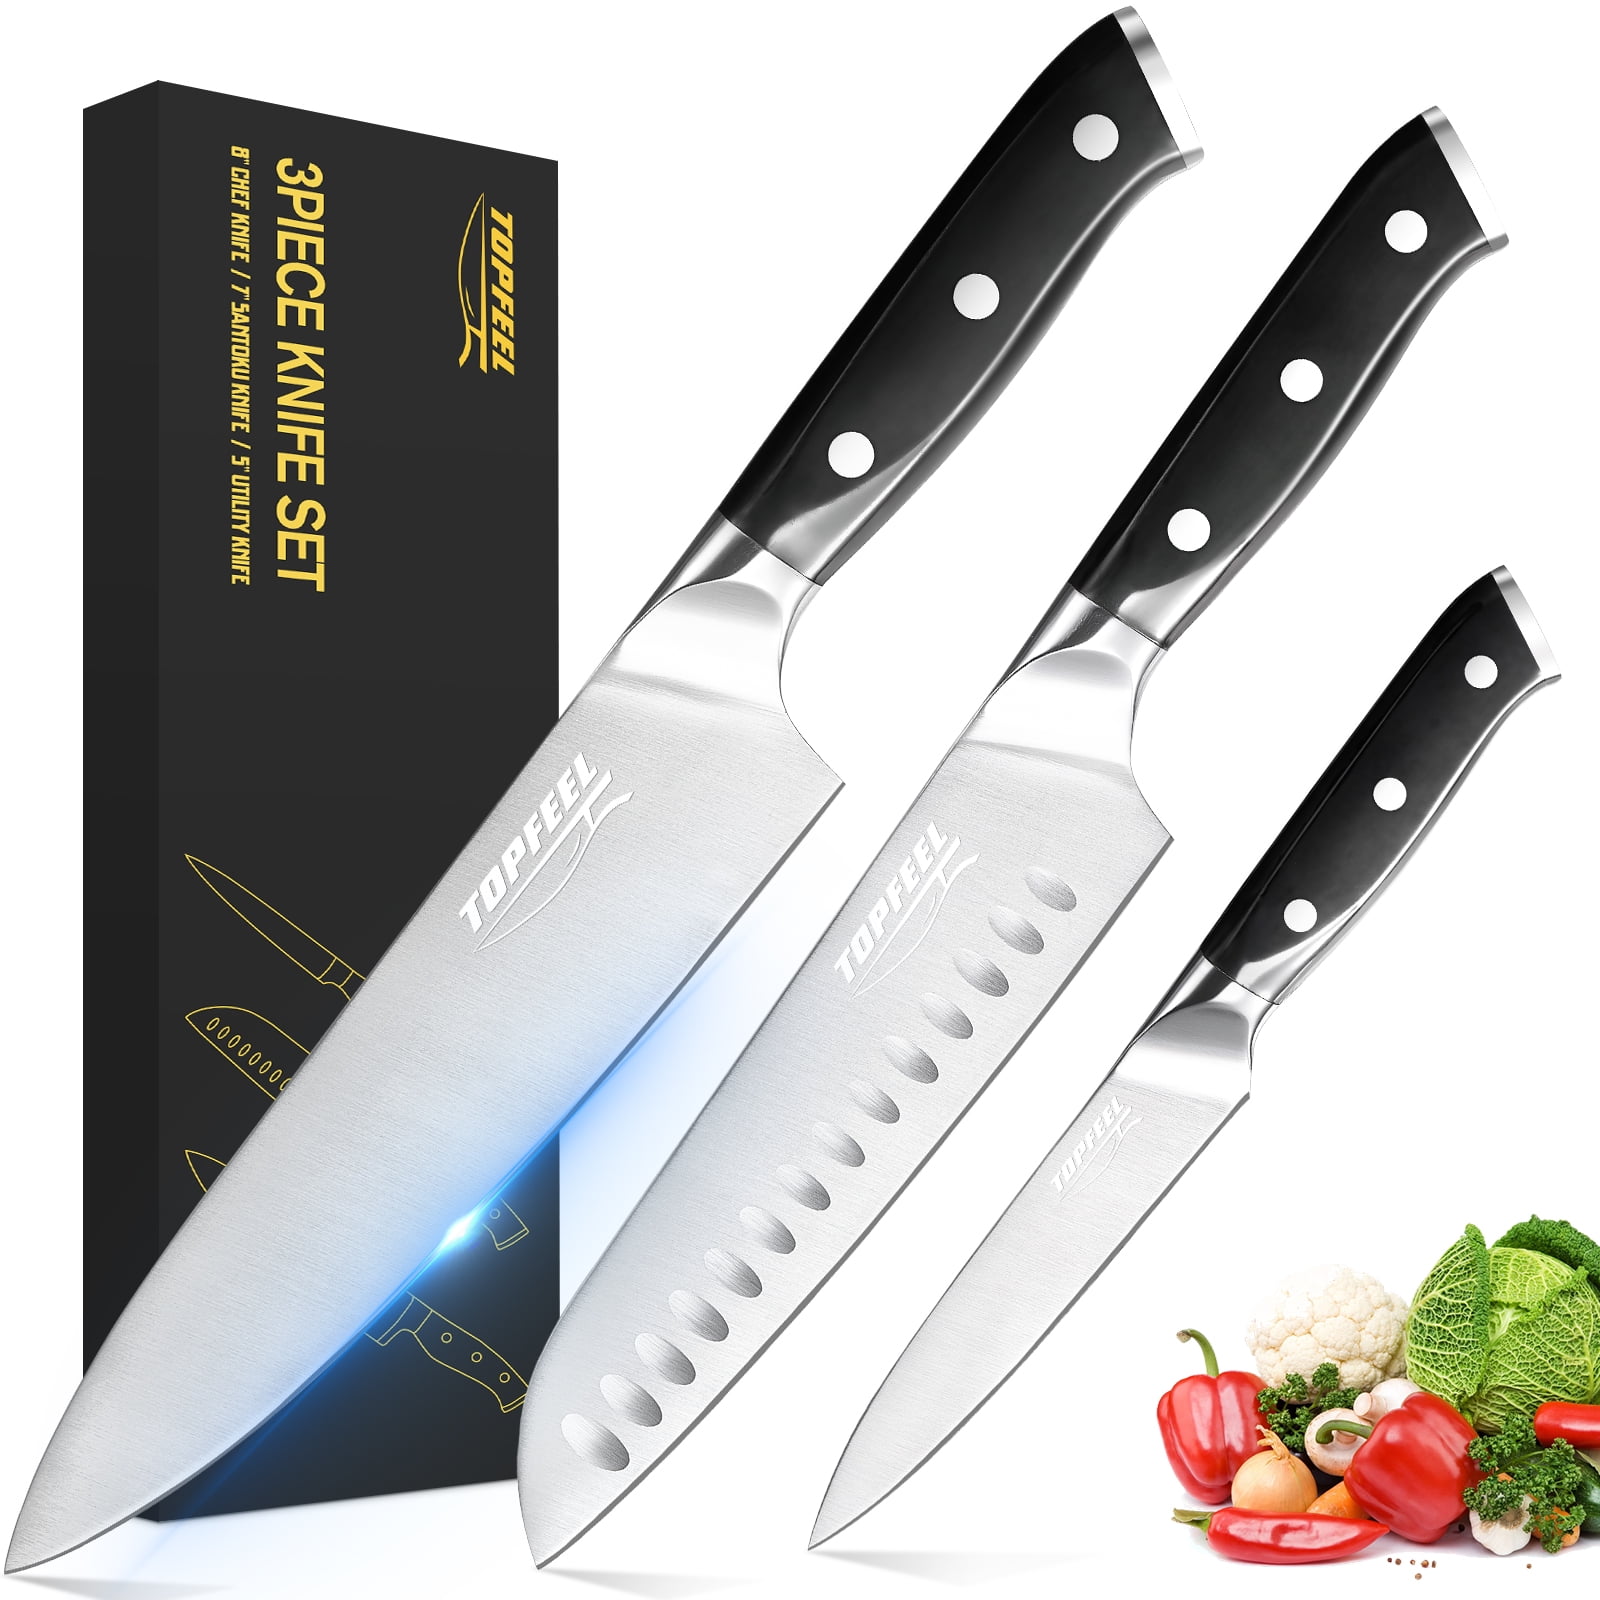 Topfeel 3pcs Butcher Knife Set Hand Forged Chef Knife Boning Knife, High Carbon Steel Meat Cutting Knife for Kitchen Camping BBQ